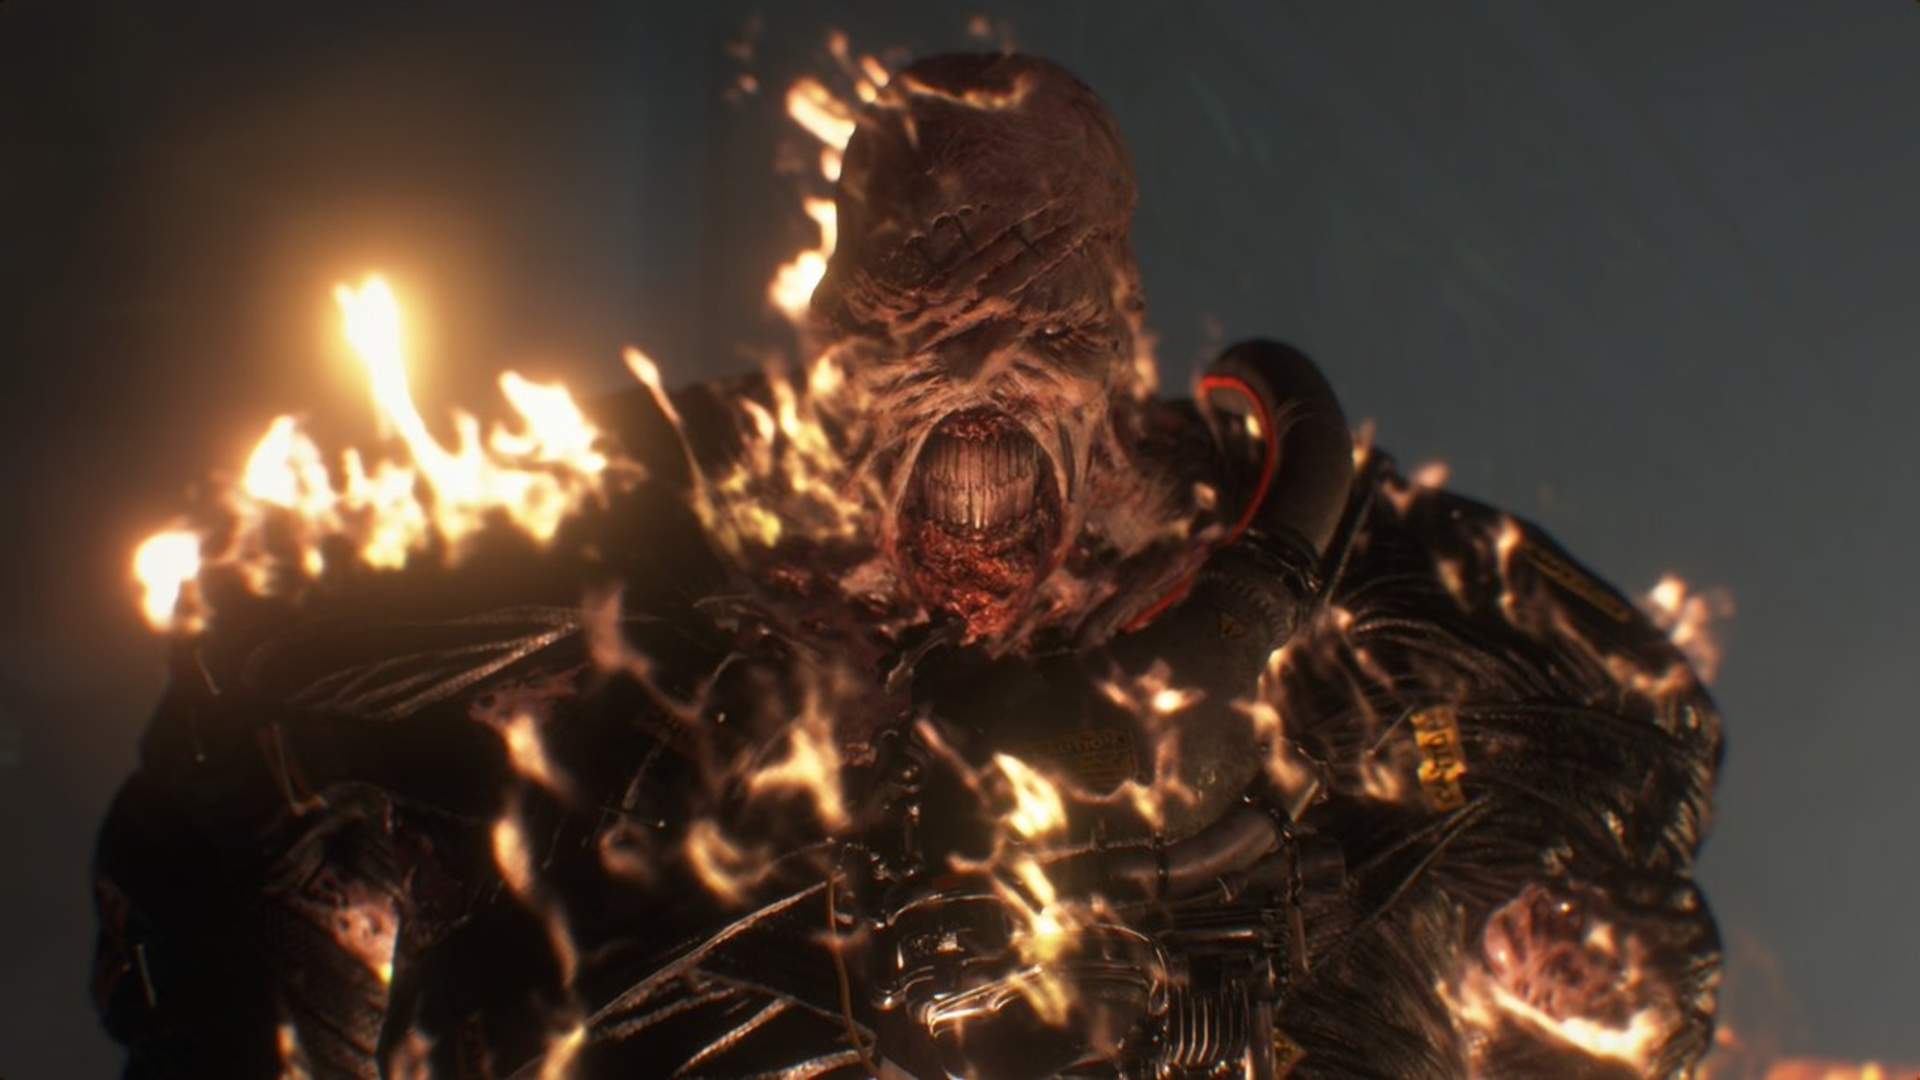 Resident Evil Remake S Nemesis Wears A Mask Leading To Some